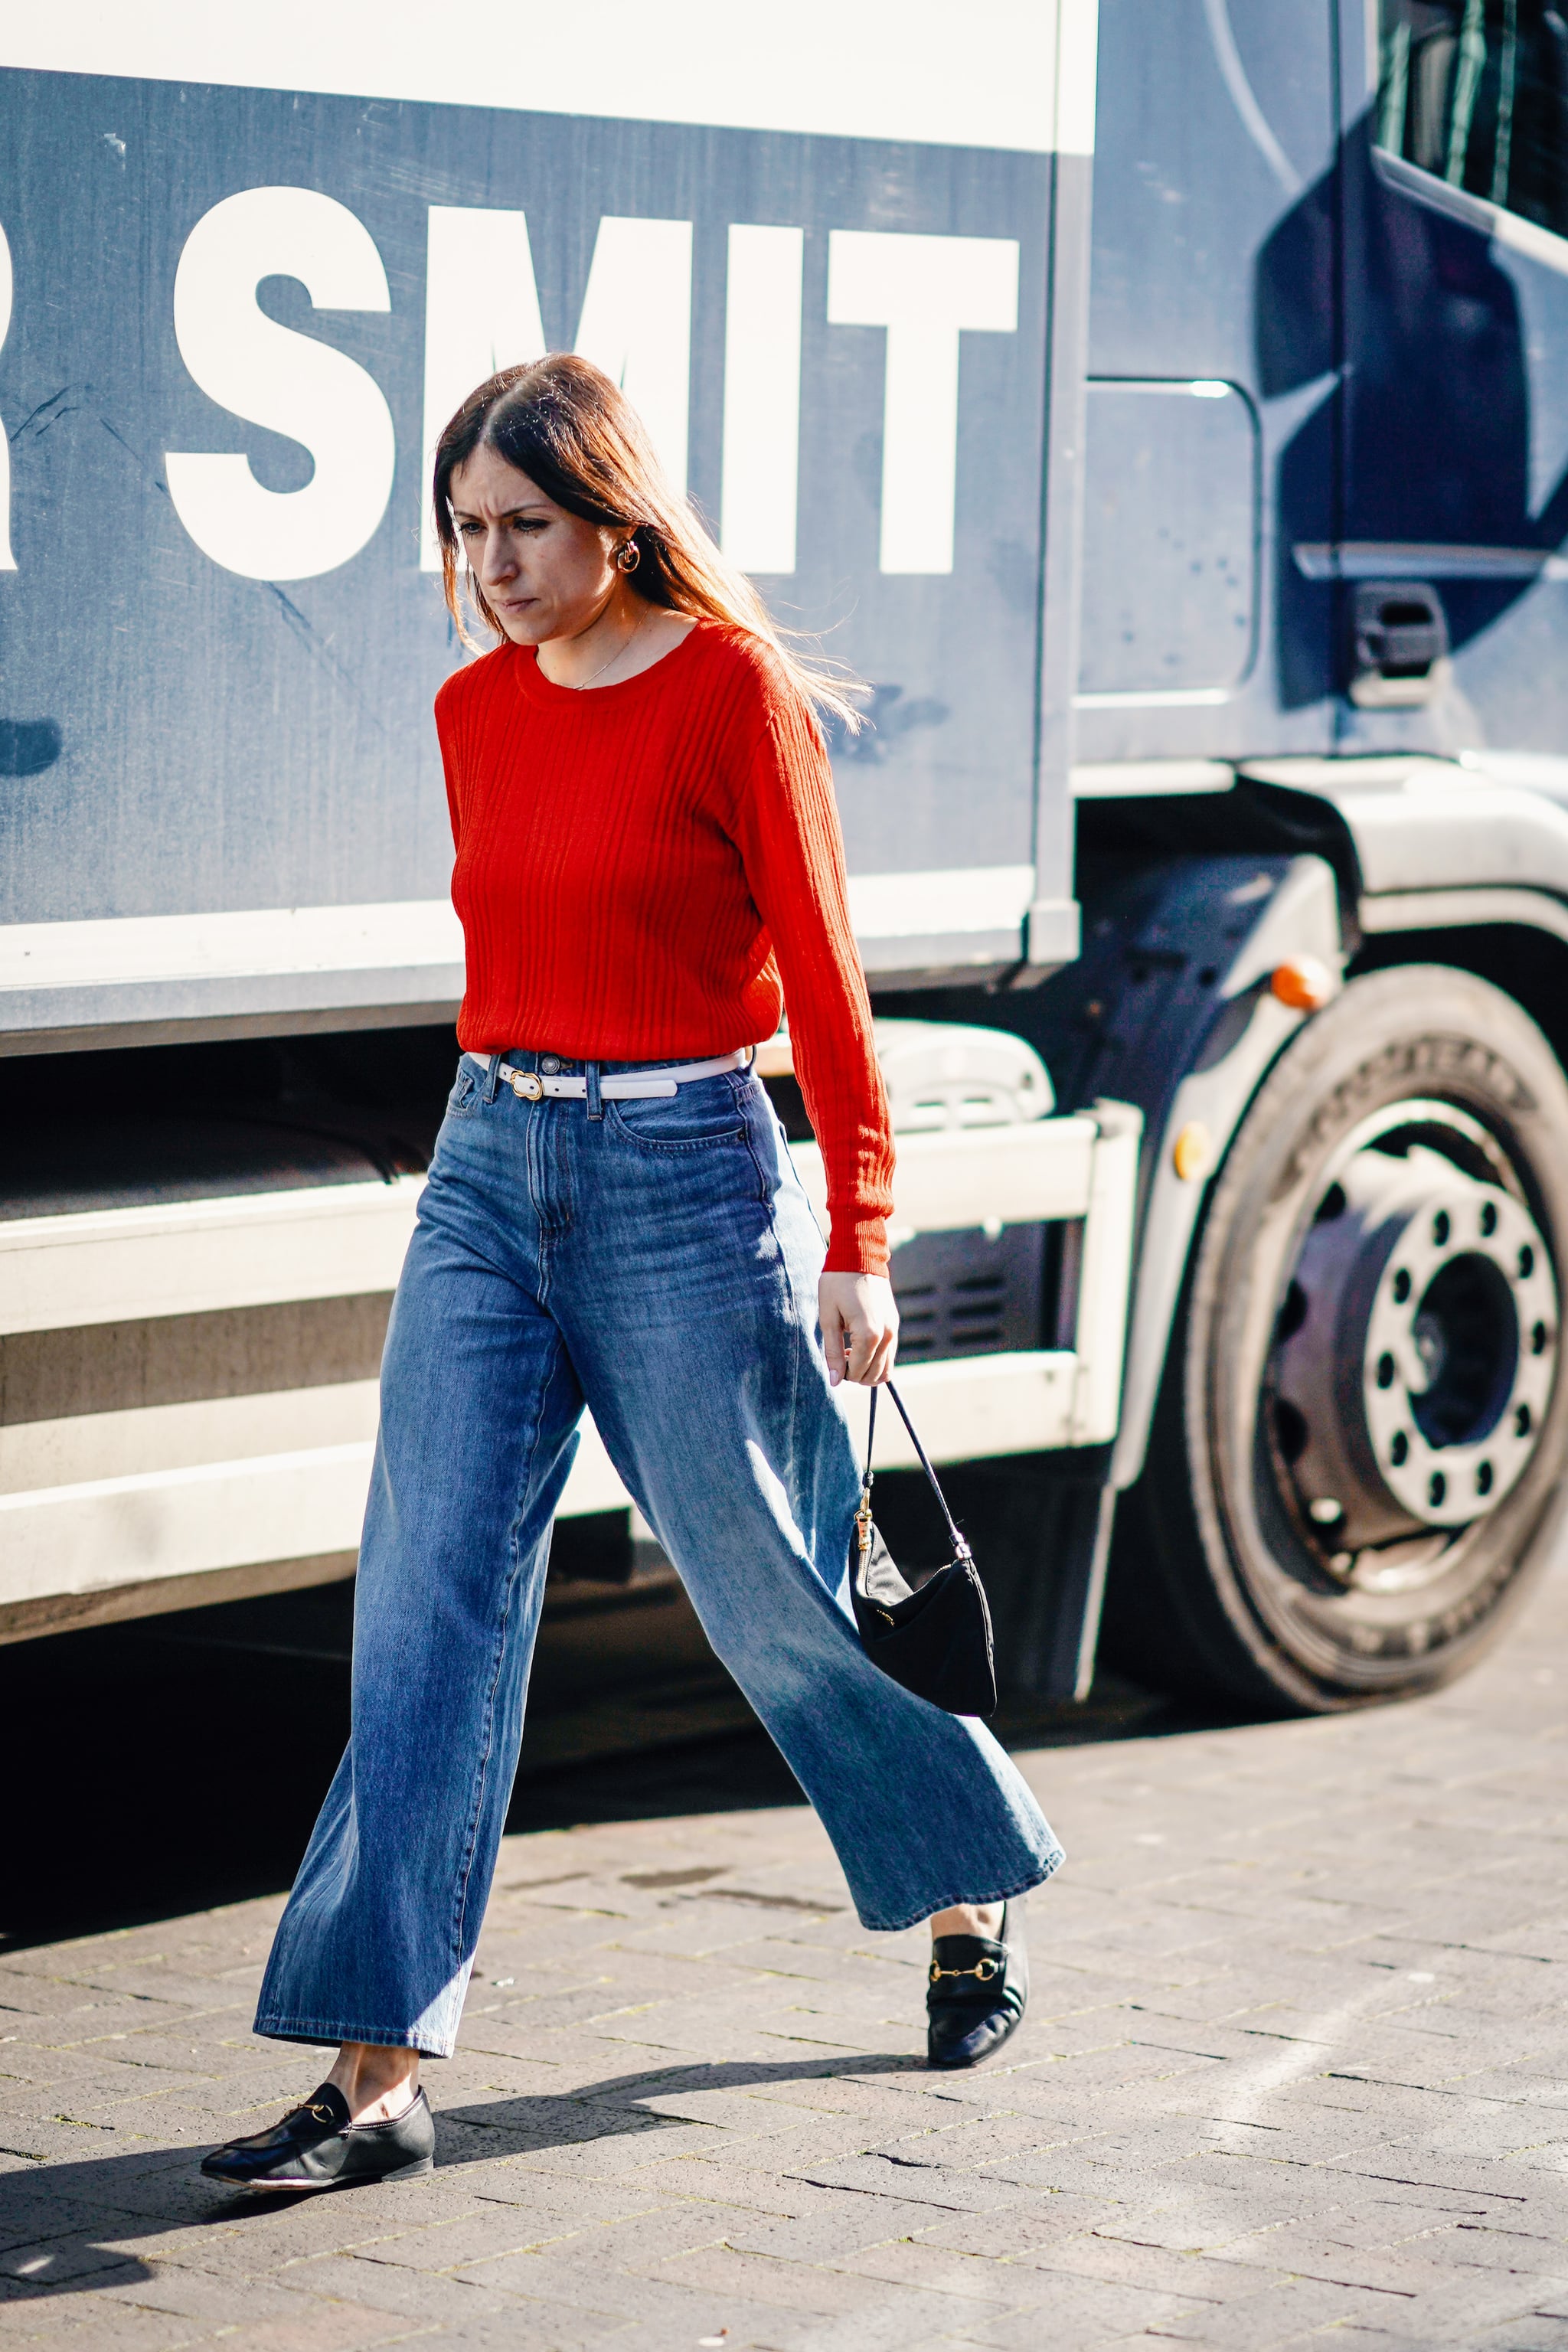 A smart knit, loafers, and cropped denim is a chic combo